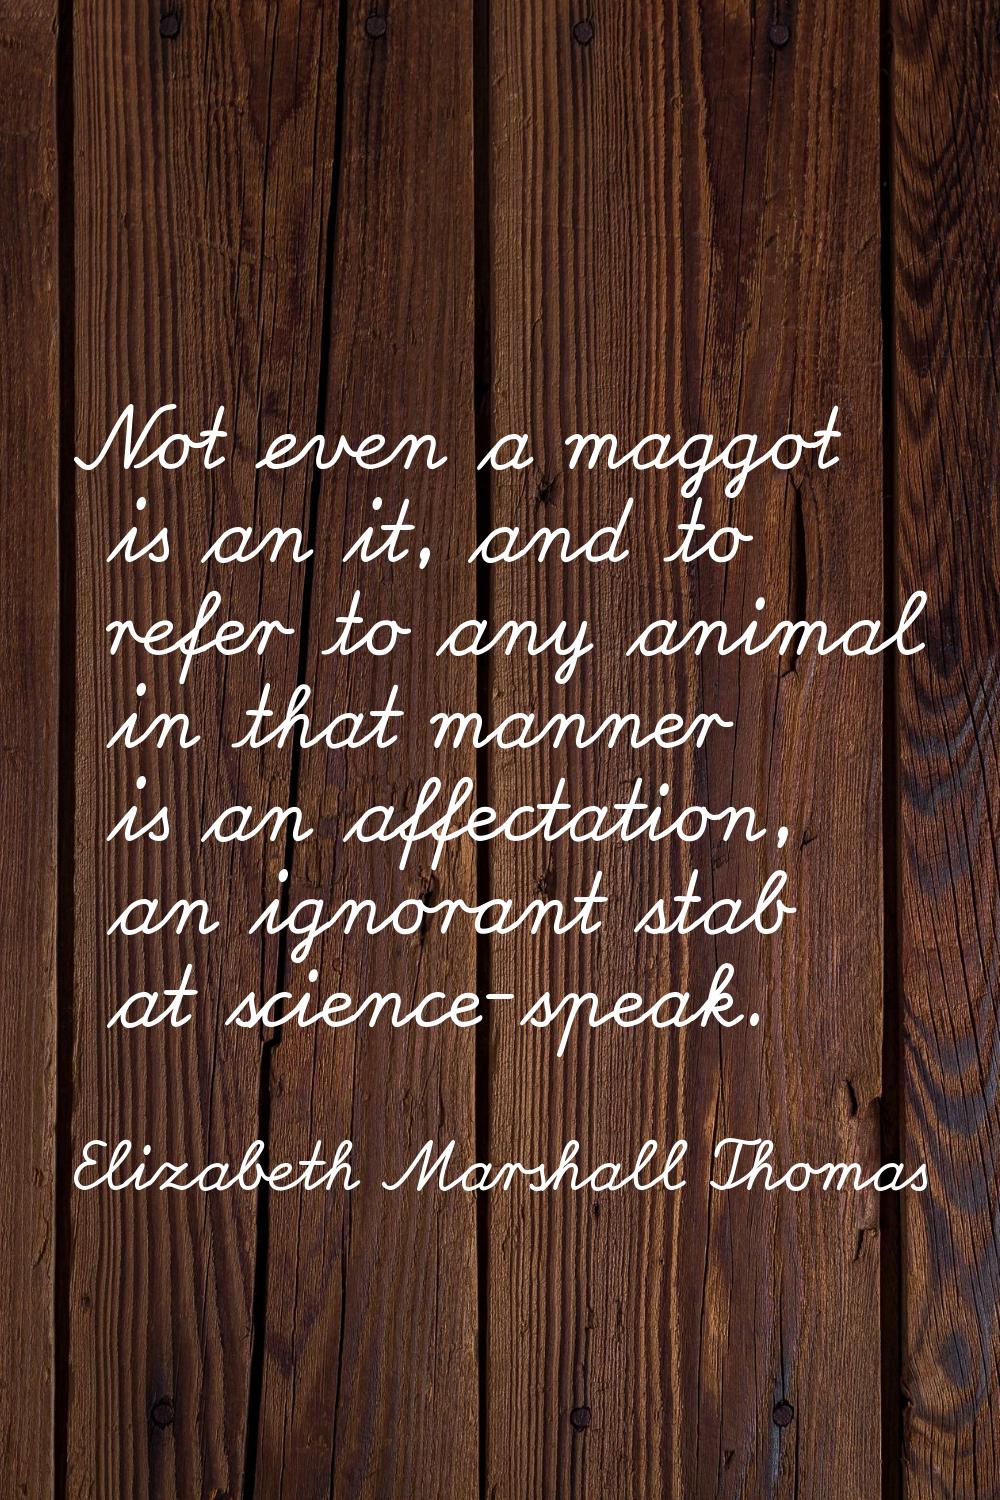 Not even a maggot is an it, and to refer to any animal in that manner is an affectation, an ignoran